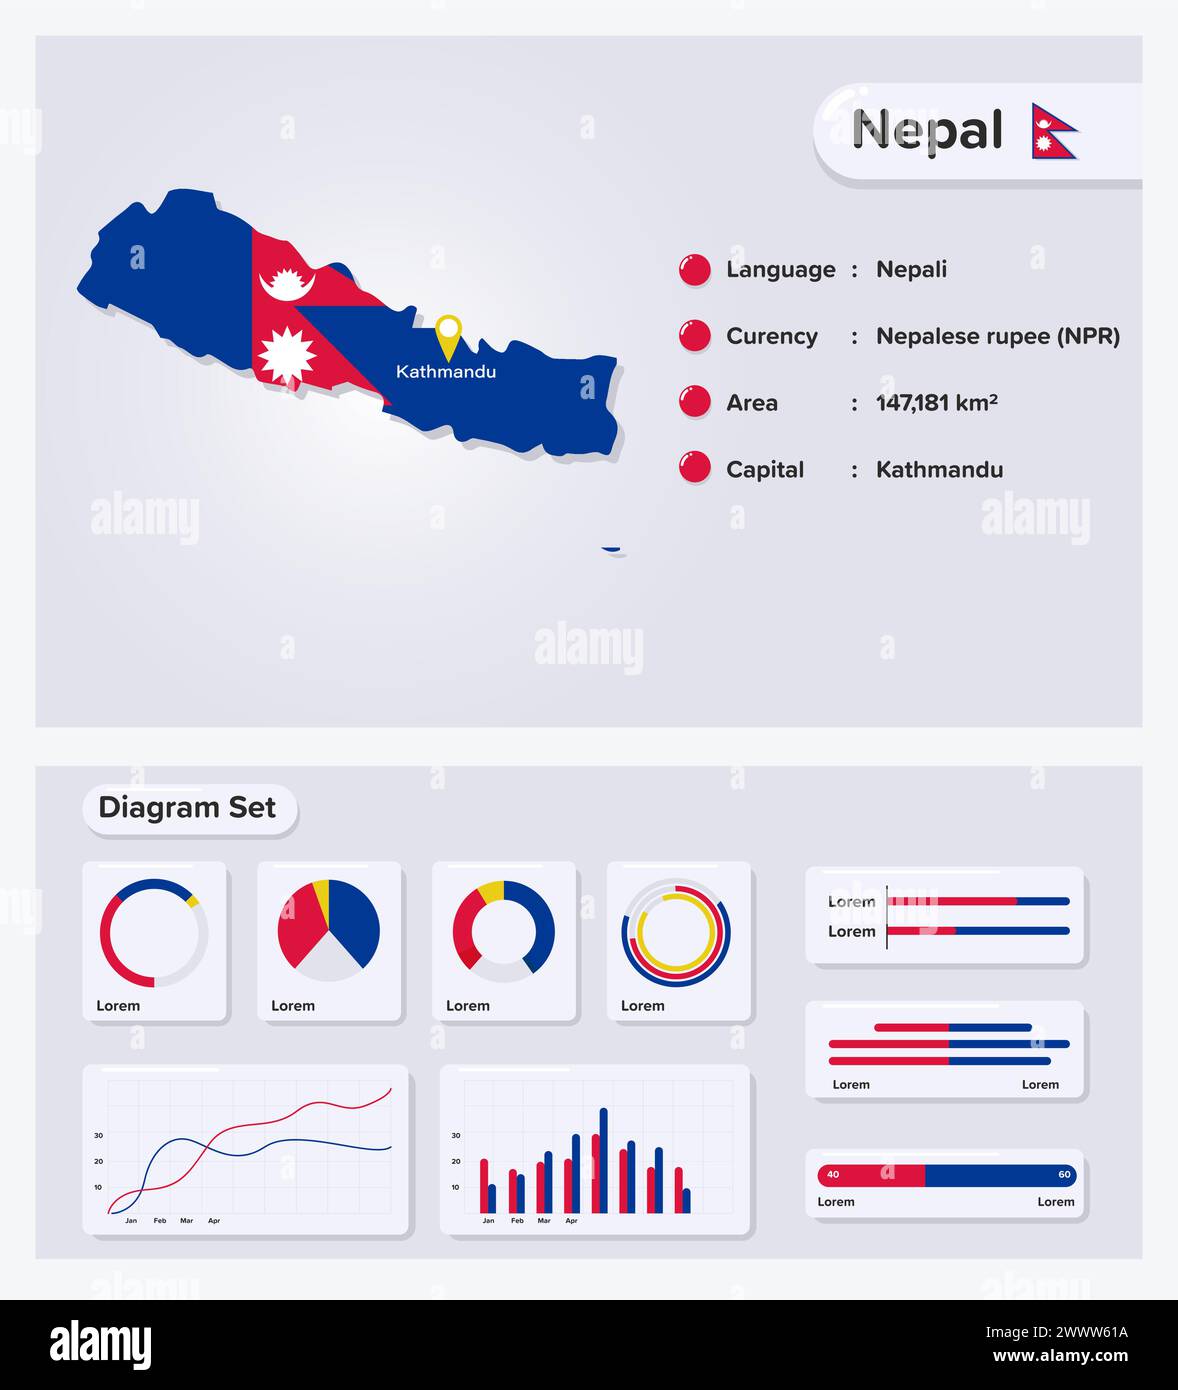 Nepal Infographic Vector Illustration, Nepal Statistical Data Element, Information Board With Flag Map, Nepal Map Flag With Diagram Set Flat Design Stock Vector